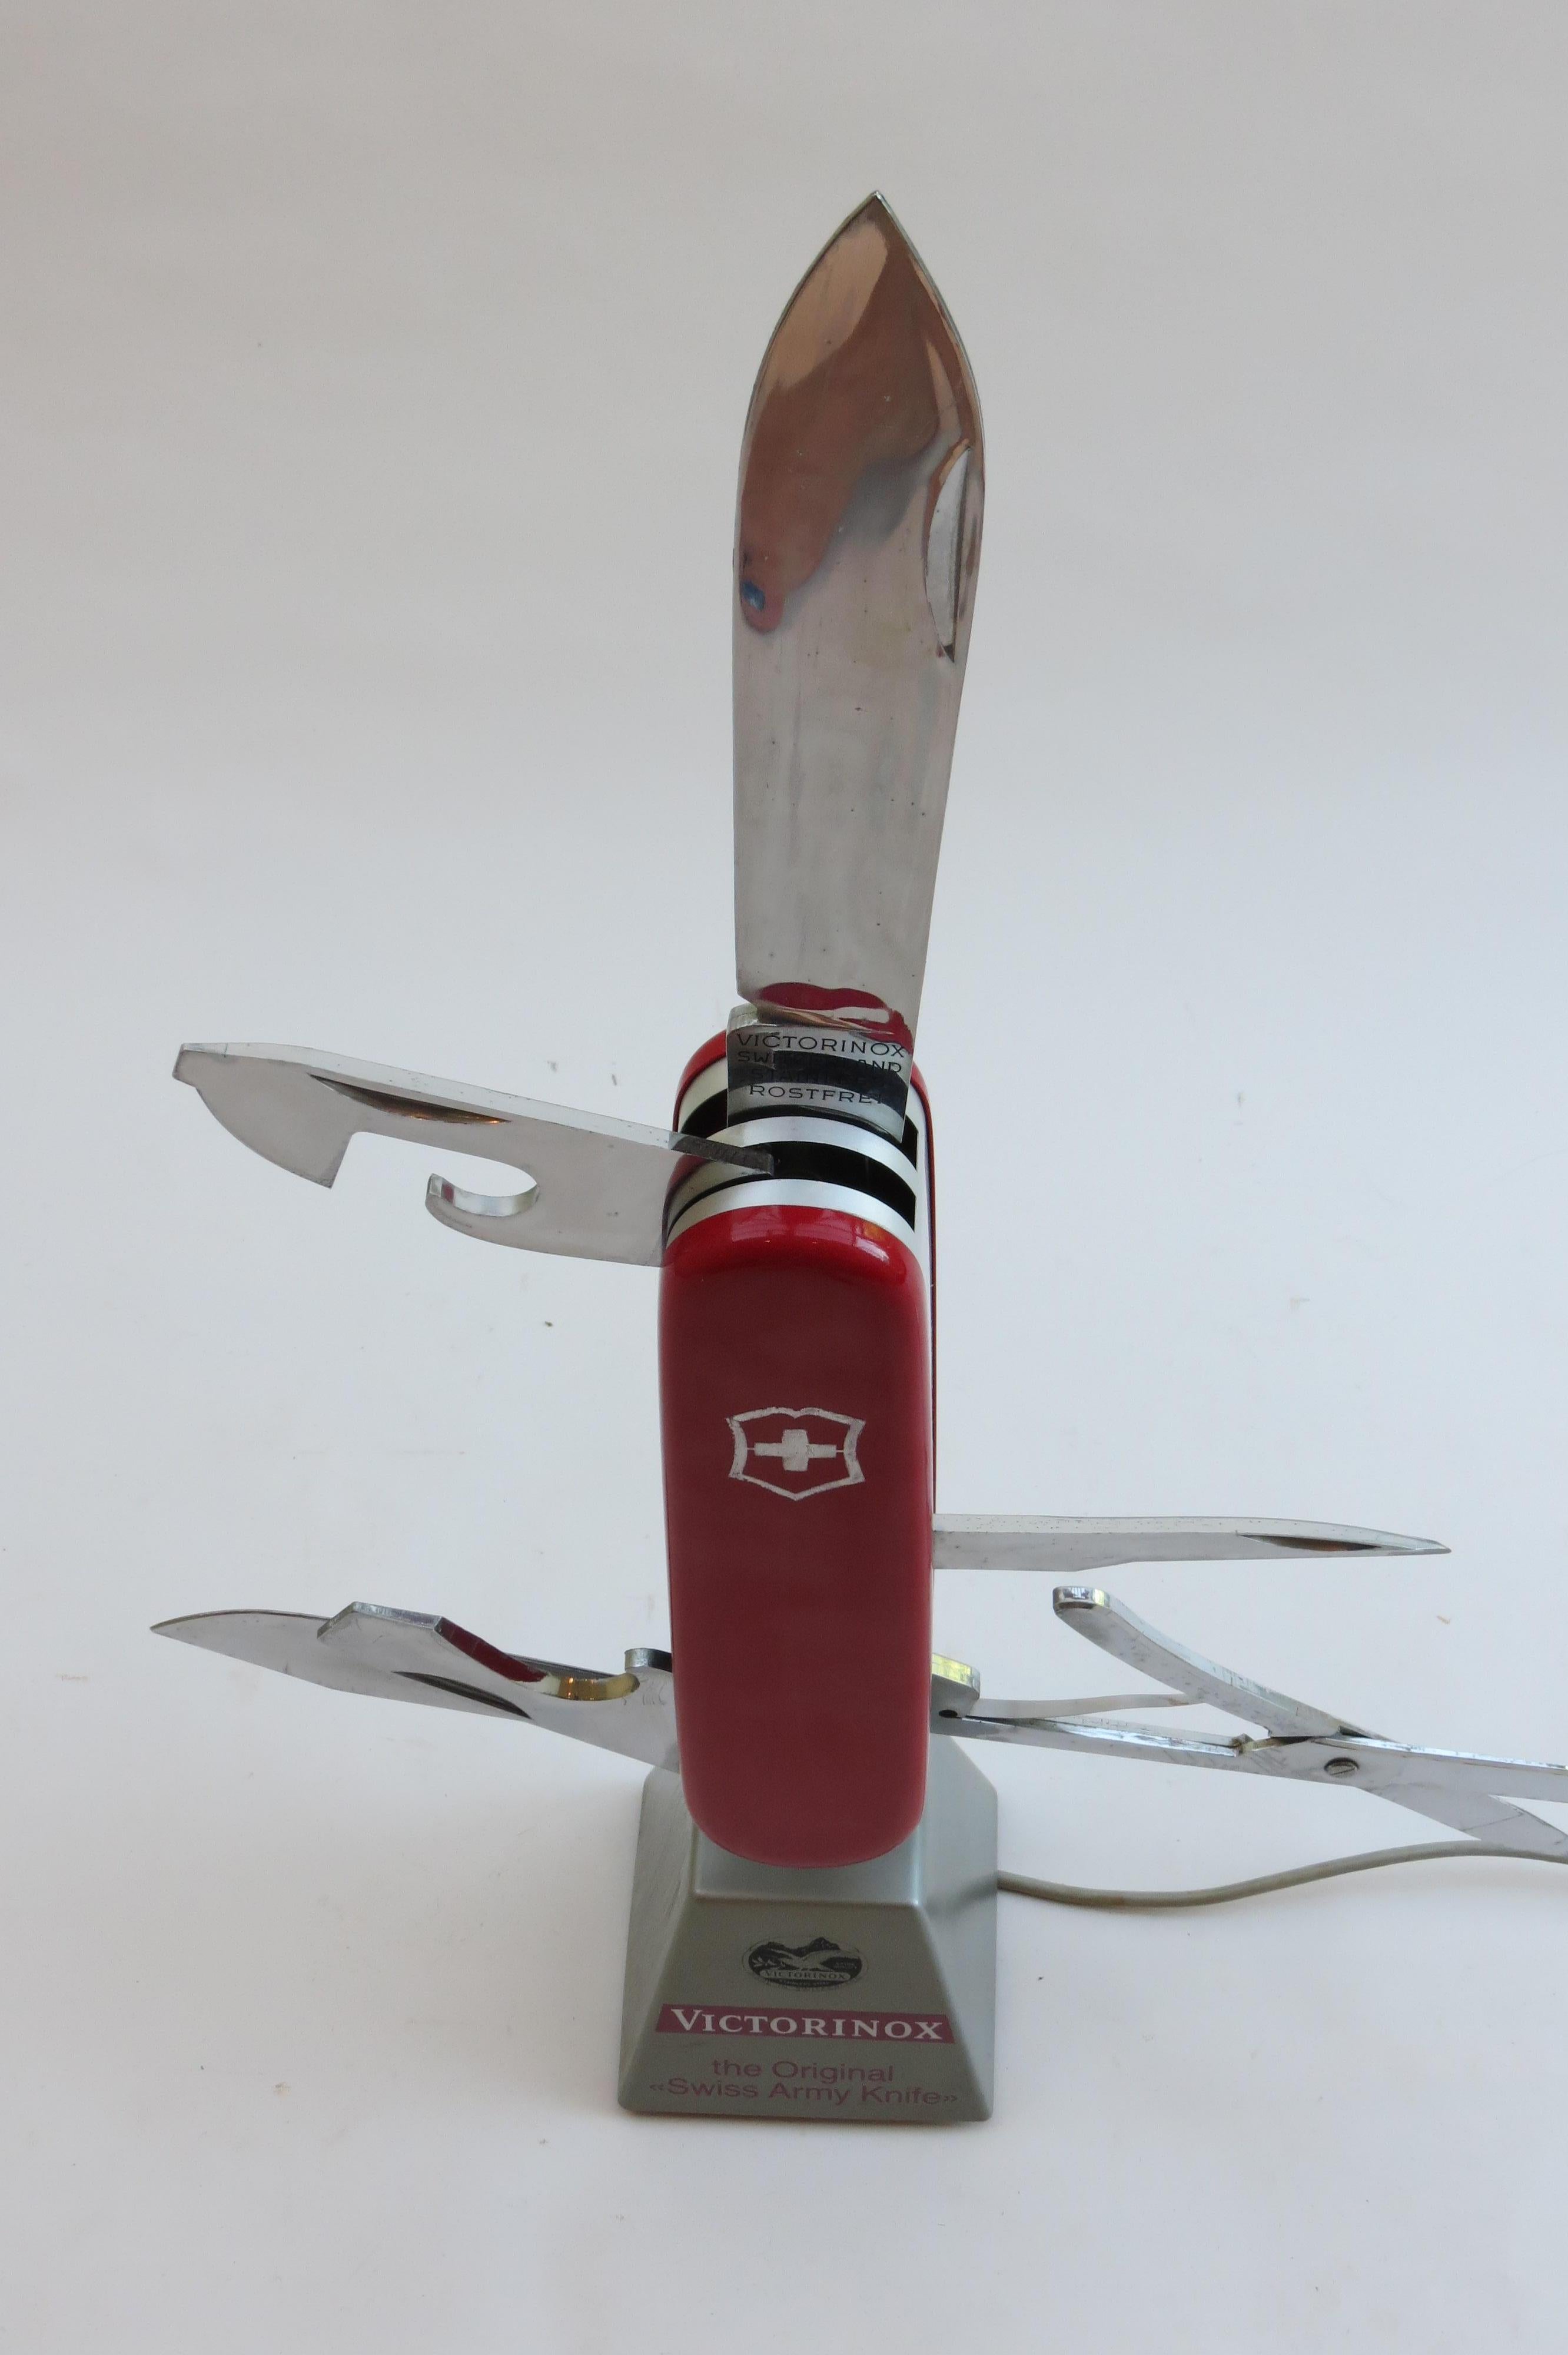 Original 1970s Swiss Army Knife display. In good working order, a motor runs the knife, opening and closing the scissors and knife blades. Made from plastic.
Stamped Victorinox Original Swiss Army Knife, Made in Switzerland Rostfrei.
Case in good